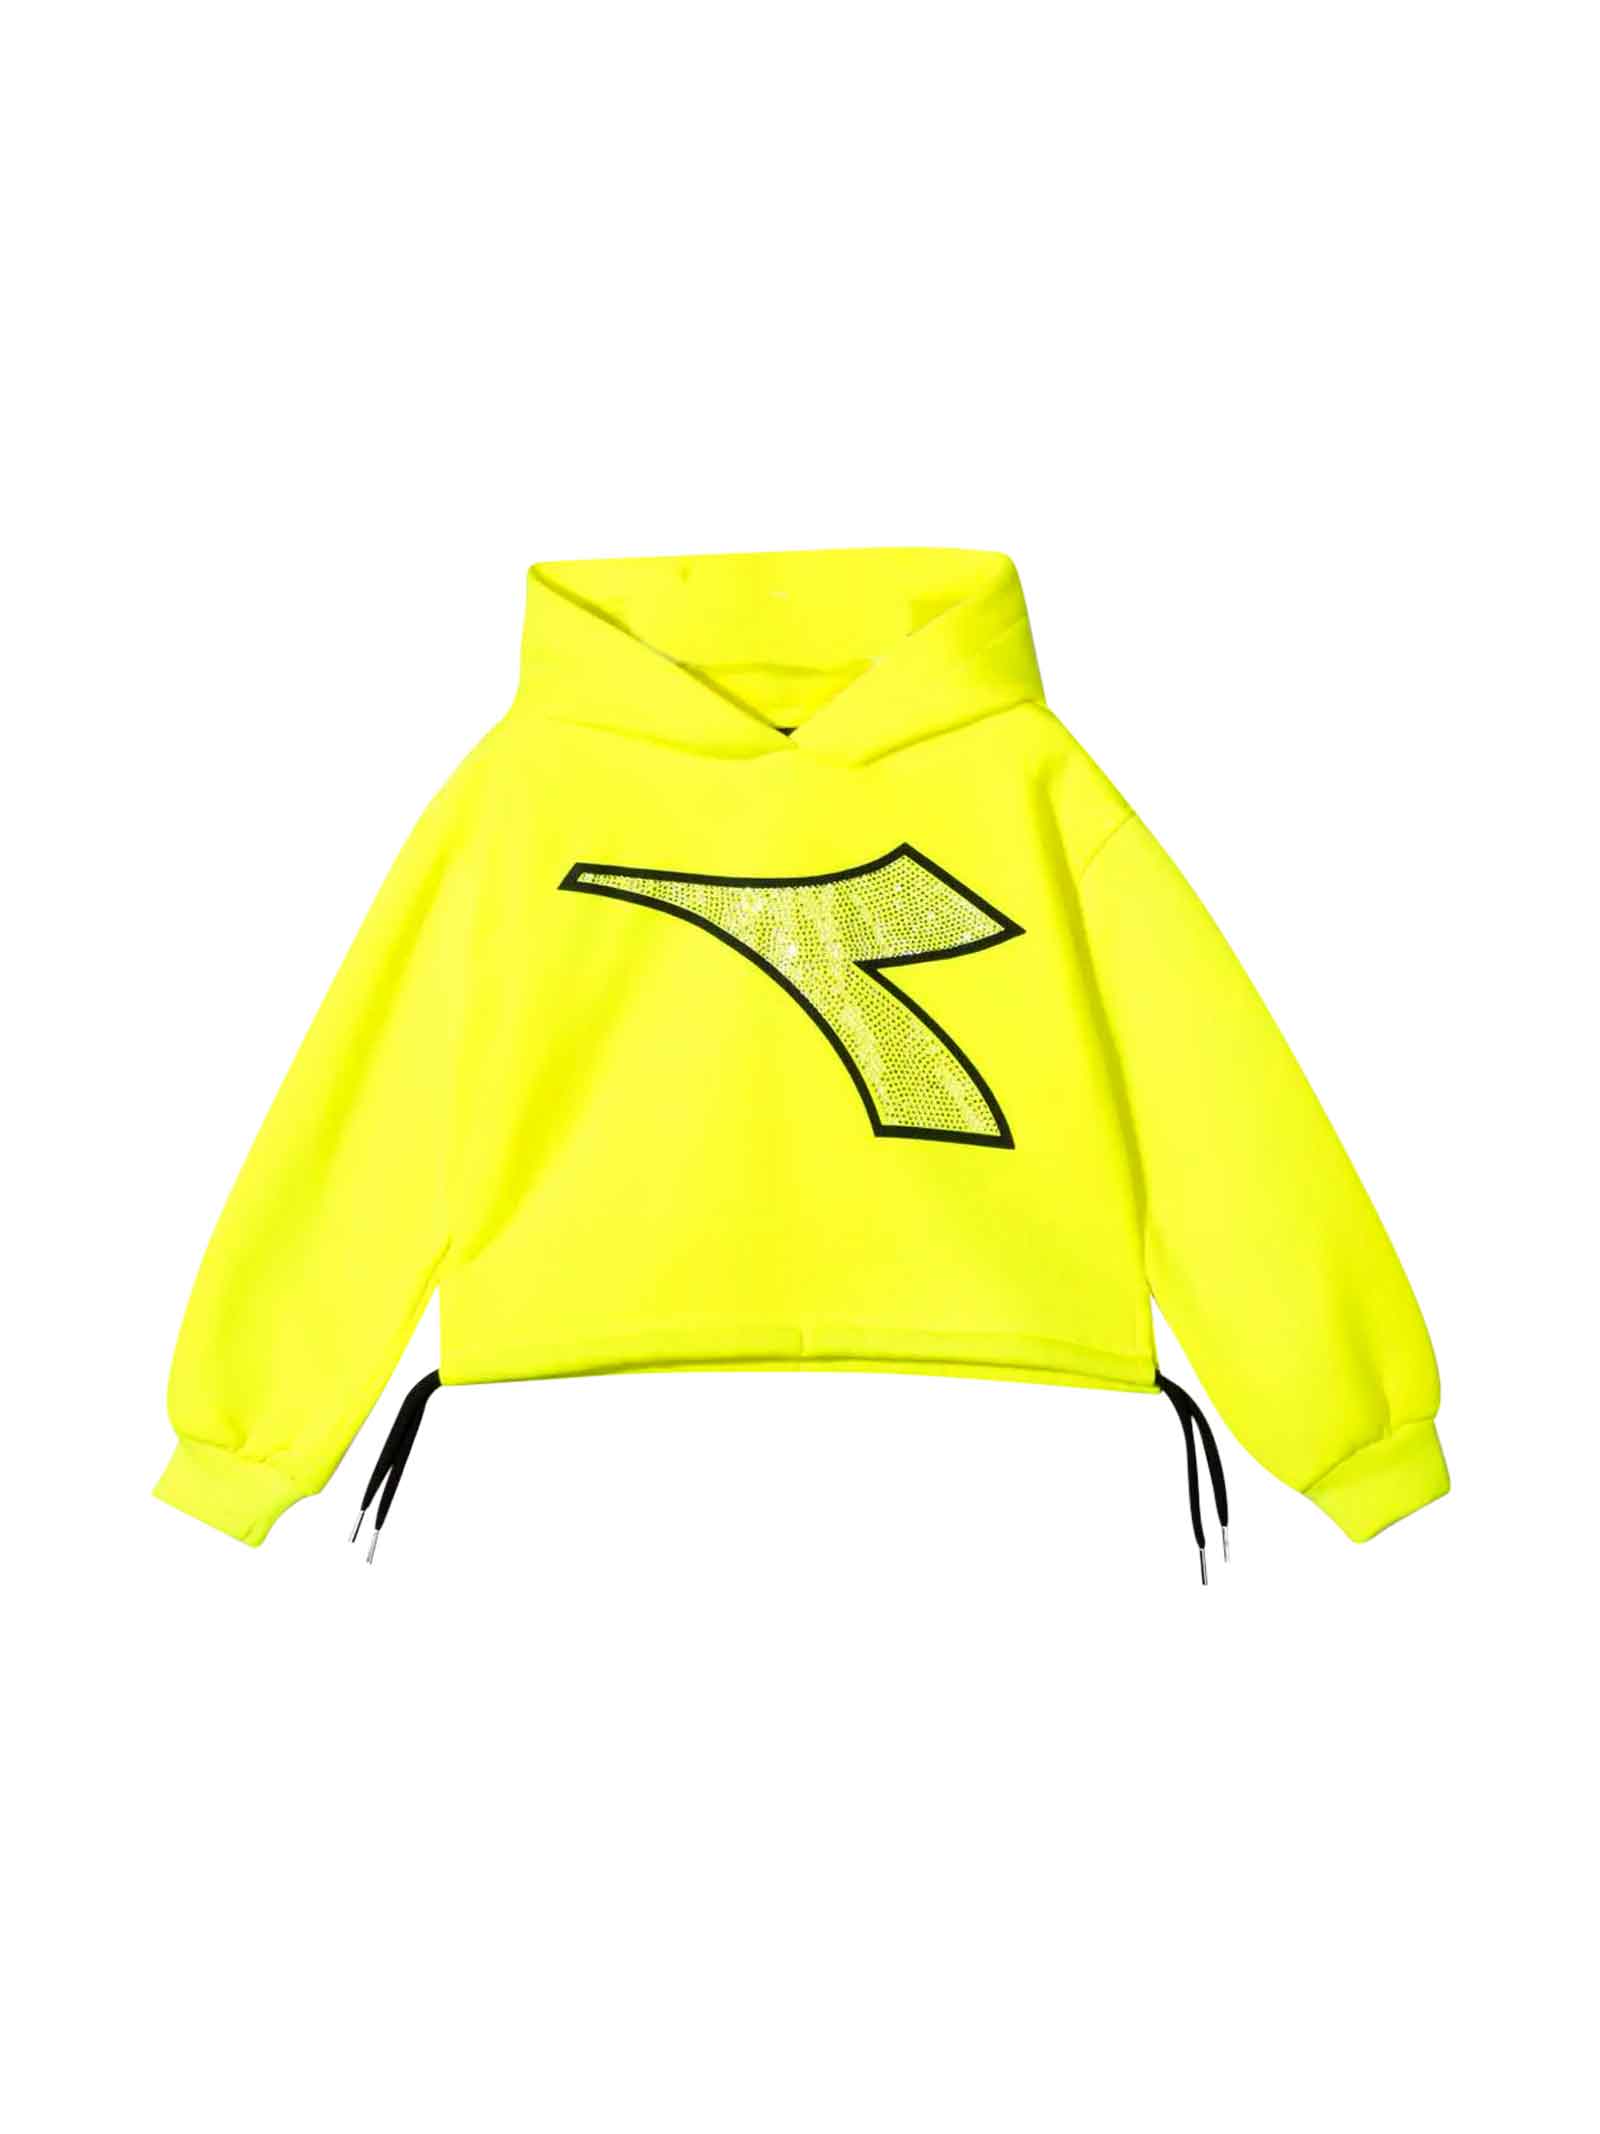 Diadora Girl Fluo Yellow Sweatshirt With Glitter Logo Print On The Front. Crop Design, Front Logo Print, Drawstring Hem, Hood And Long Sleeves. Polyes